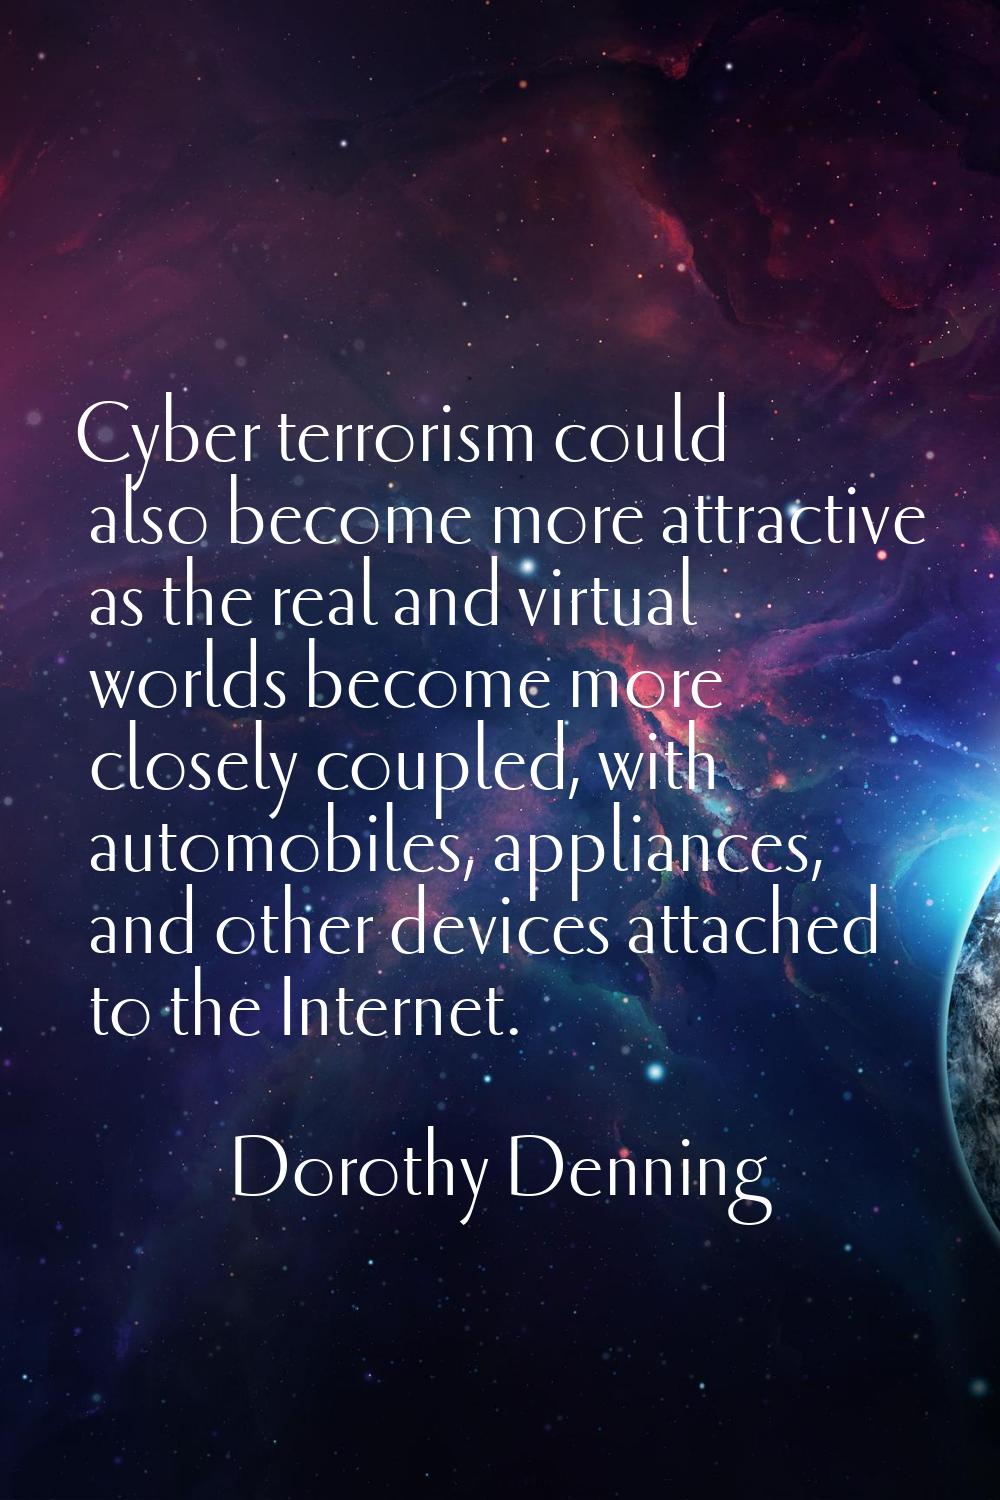 Cyber terrorism could also become more attractive as the real and virtual worlds become more closel